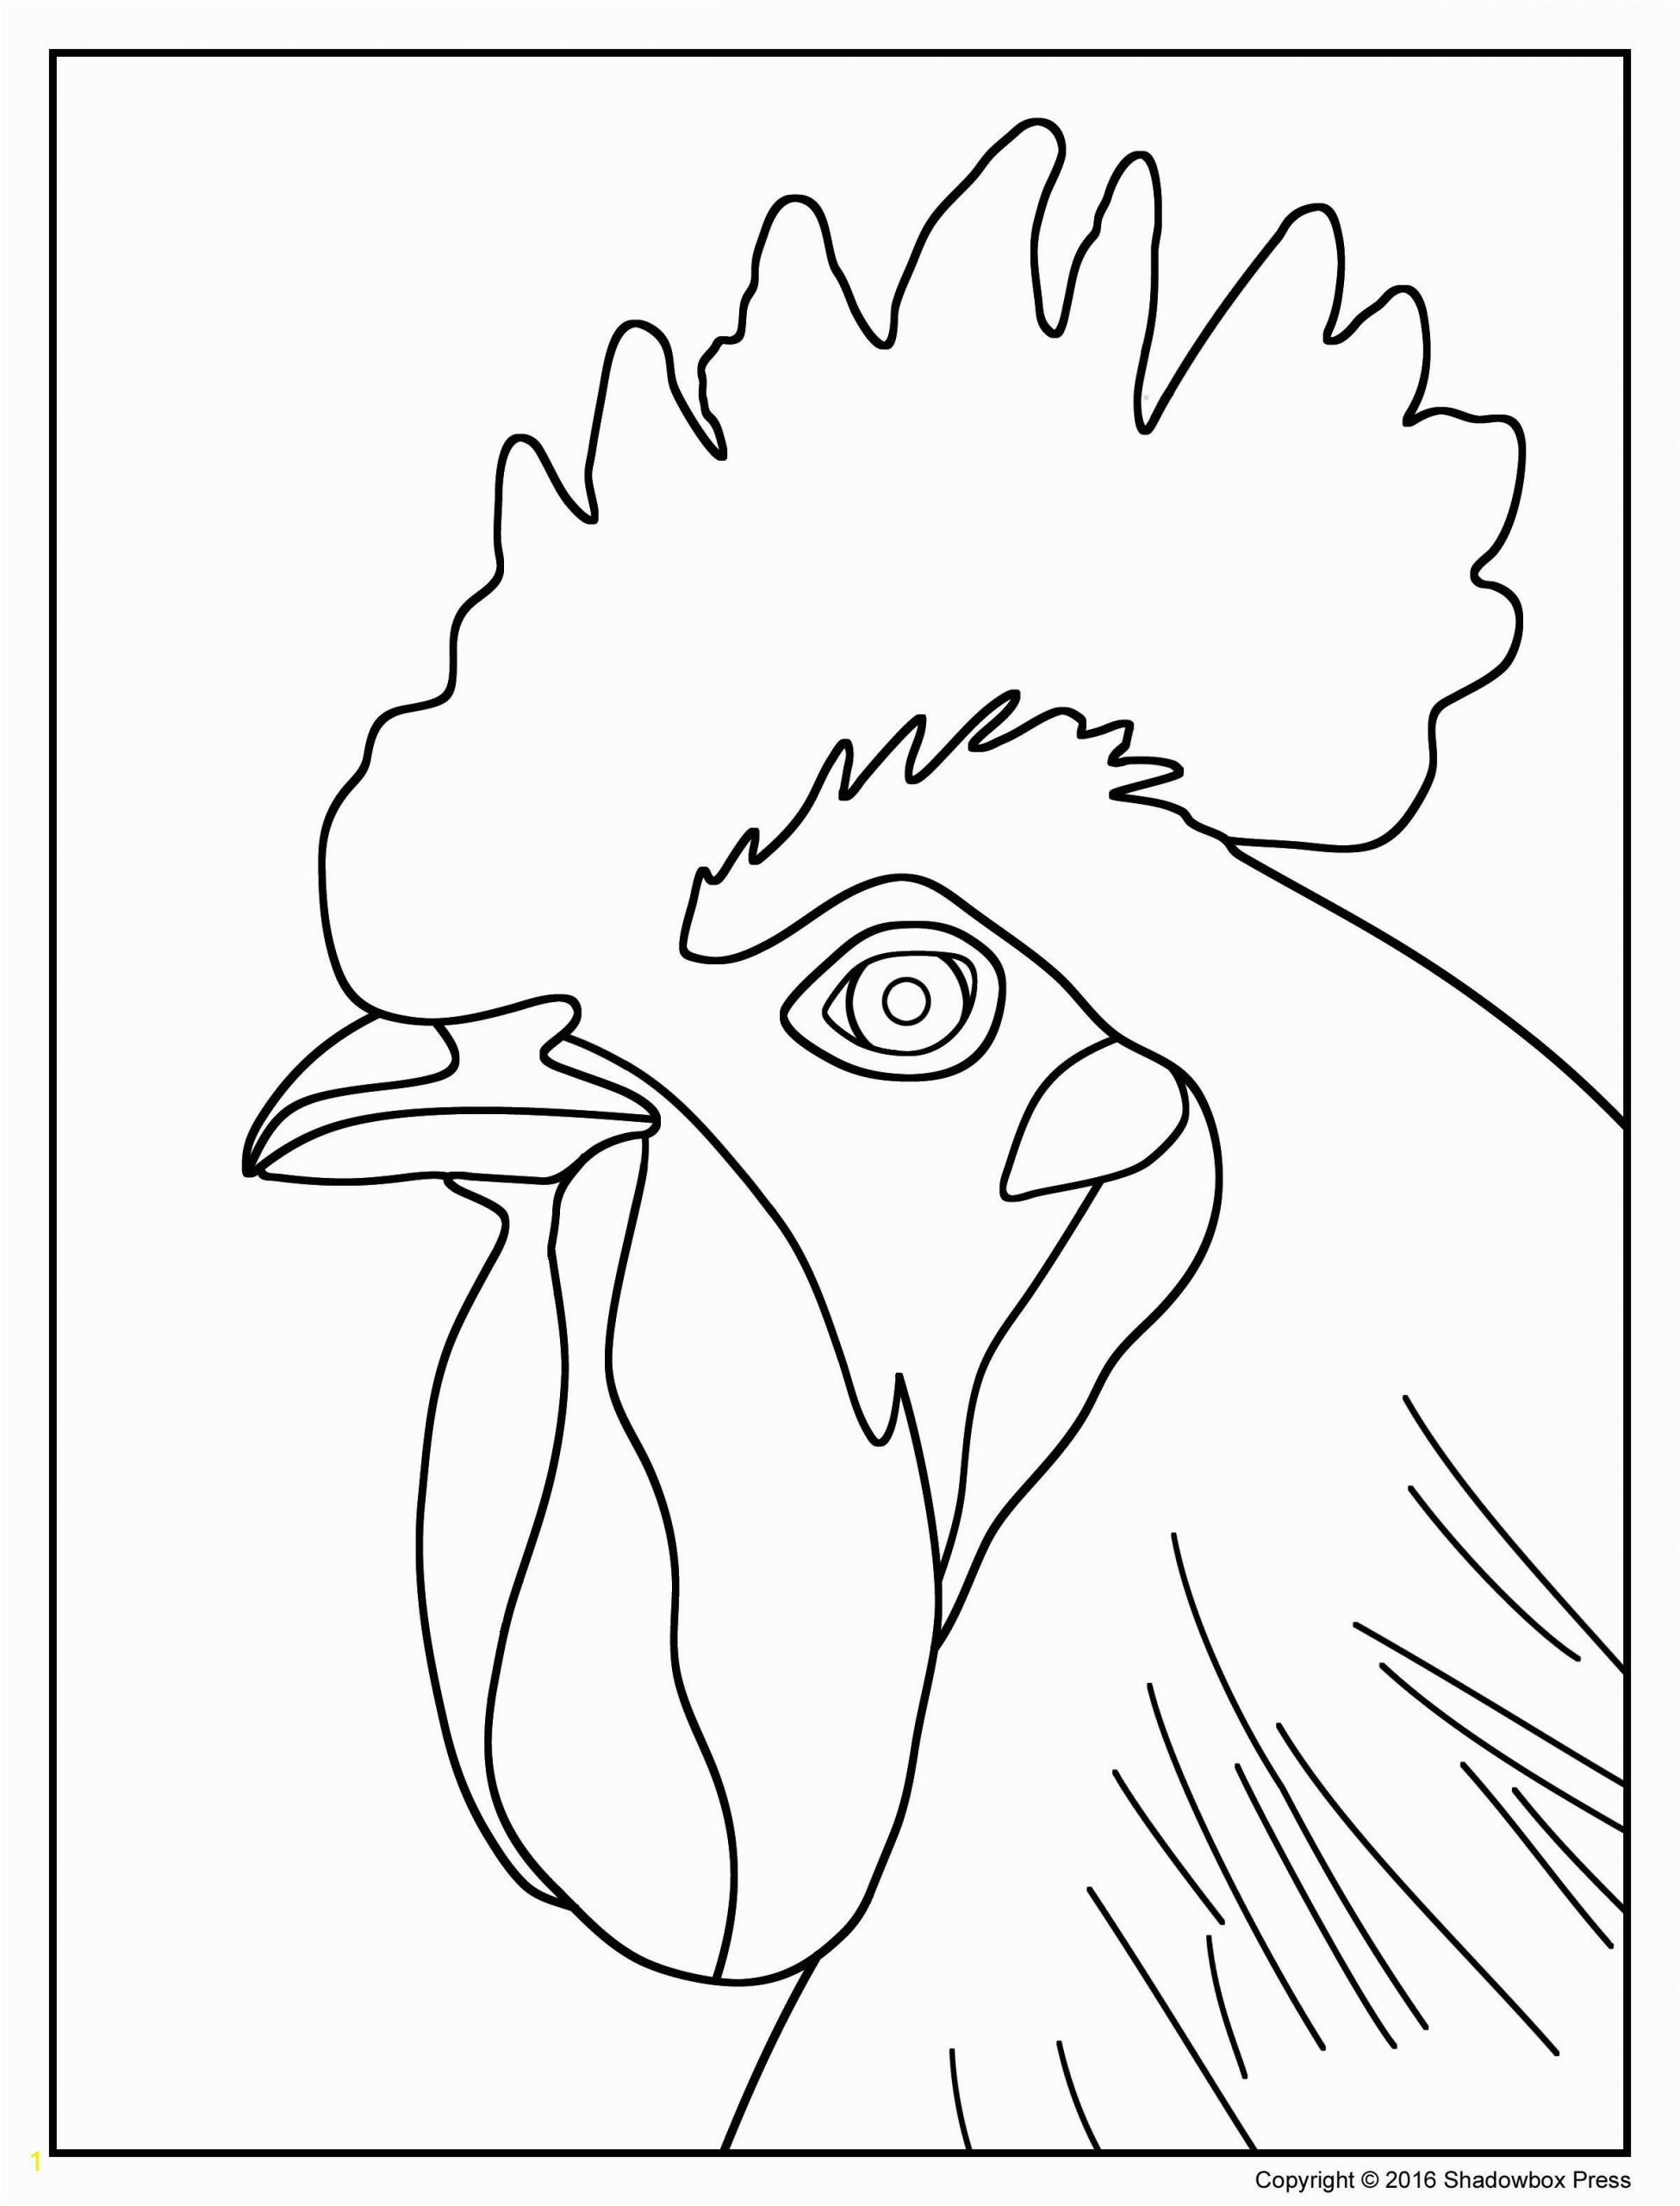 Printable Coloring Pages for Alzheimer S Patients Downloadable Coloring Pages at Getcolorings